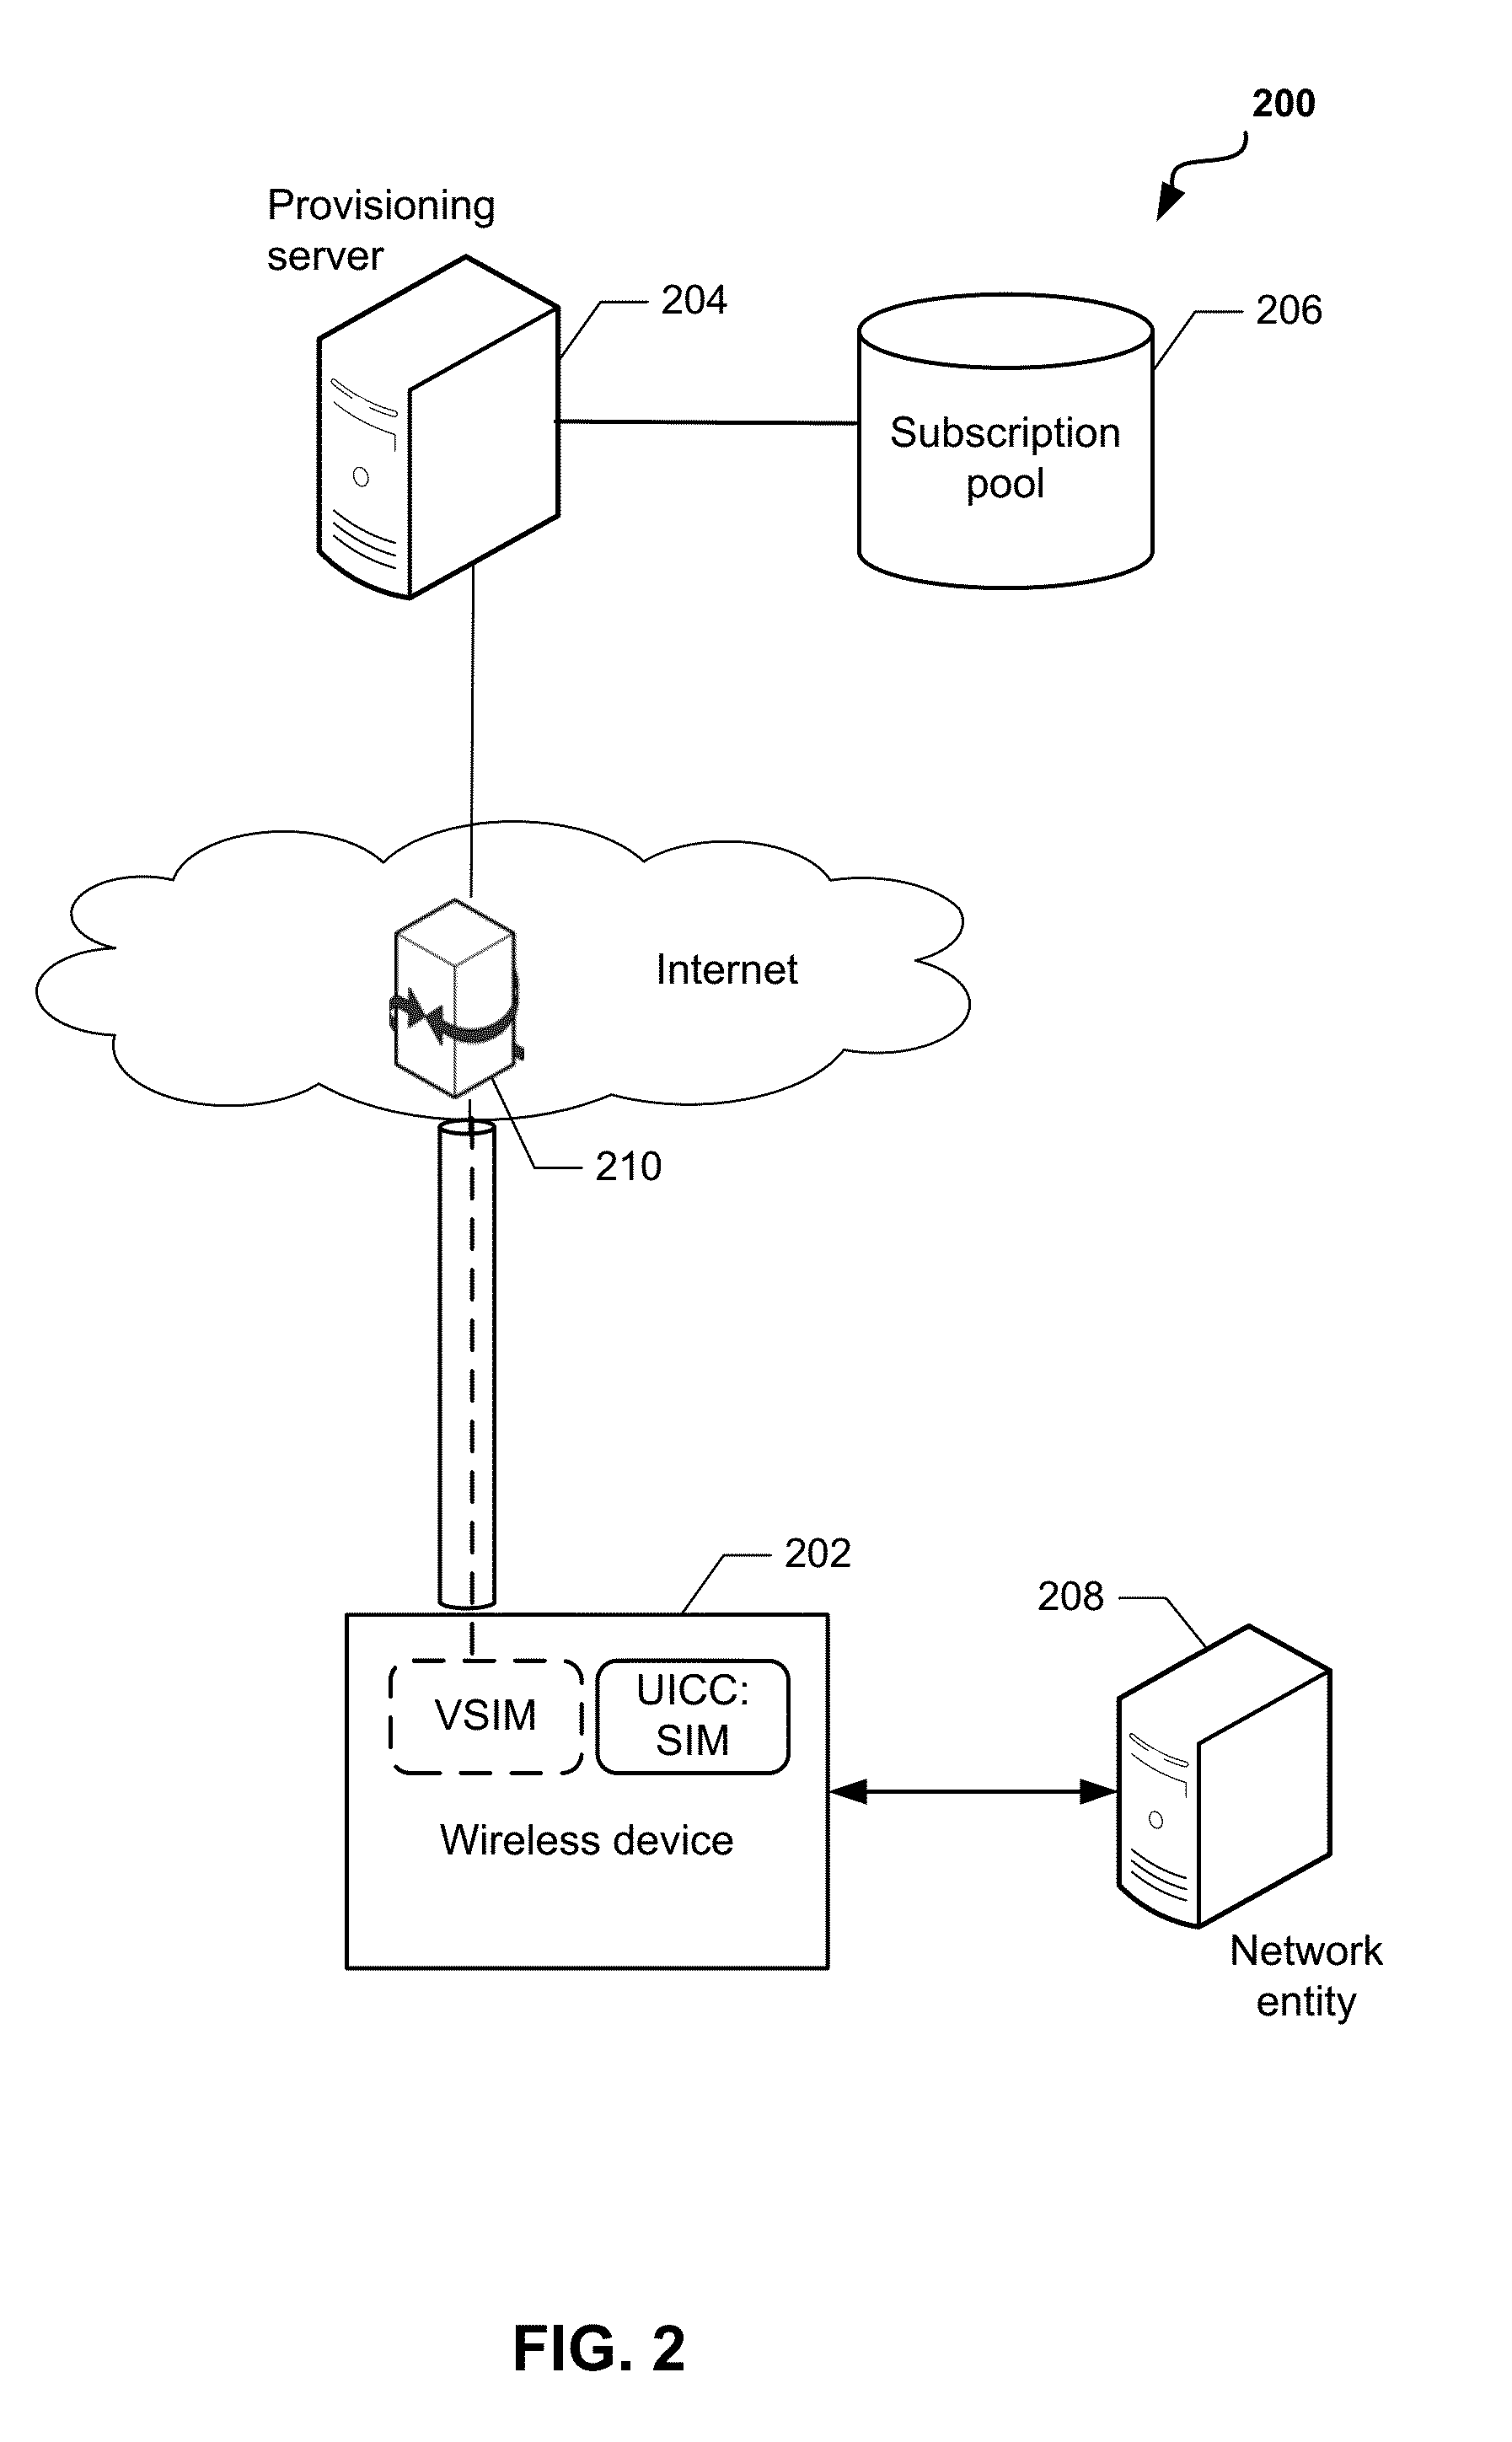 System and Methods for Dynamic SIM Provisioning on a Dual-SIM Wireless Communication Device